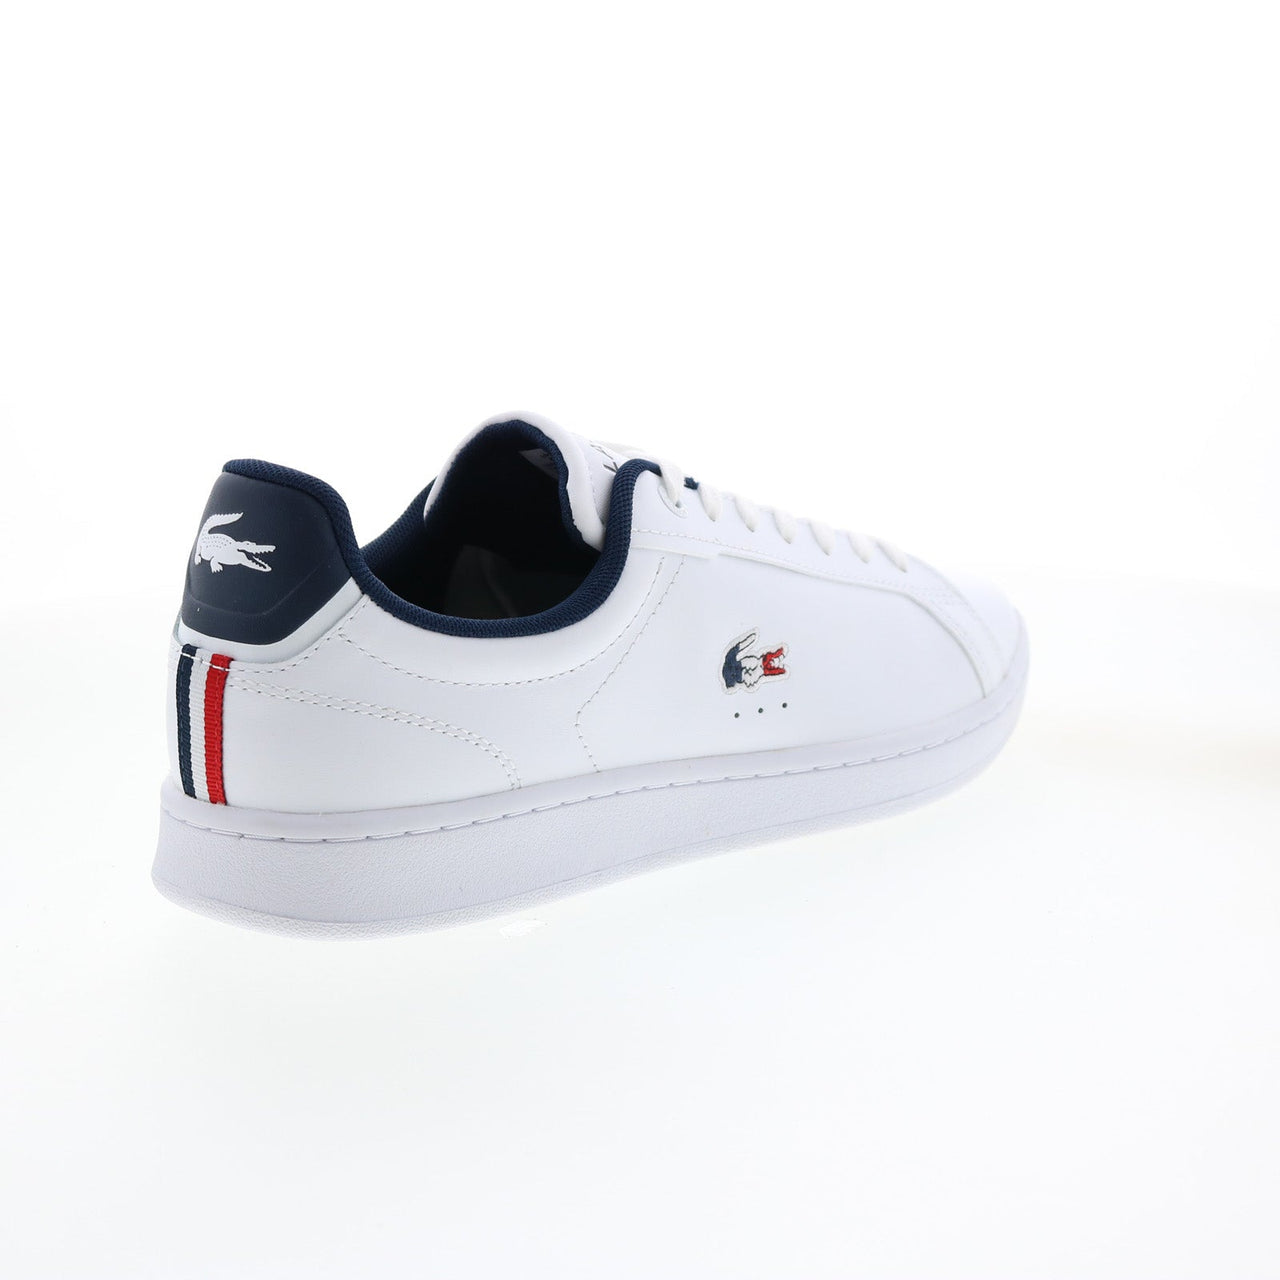 Lacoste Carnaby Pro Tri 7-45SMA0114407 Mens White Lifestyle Sneakers S ...